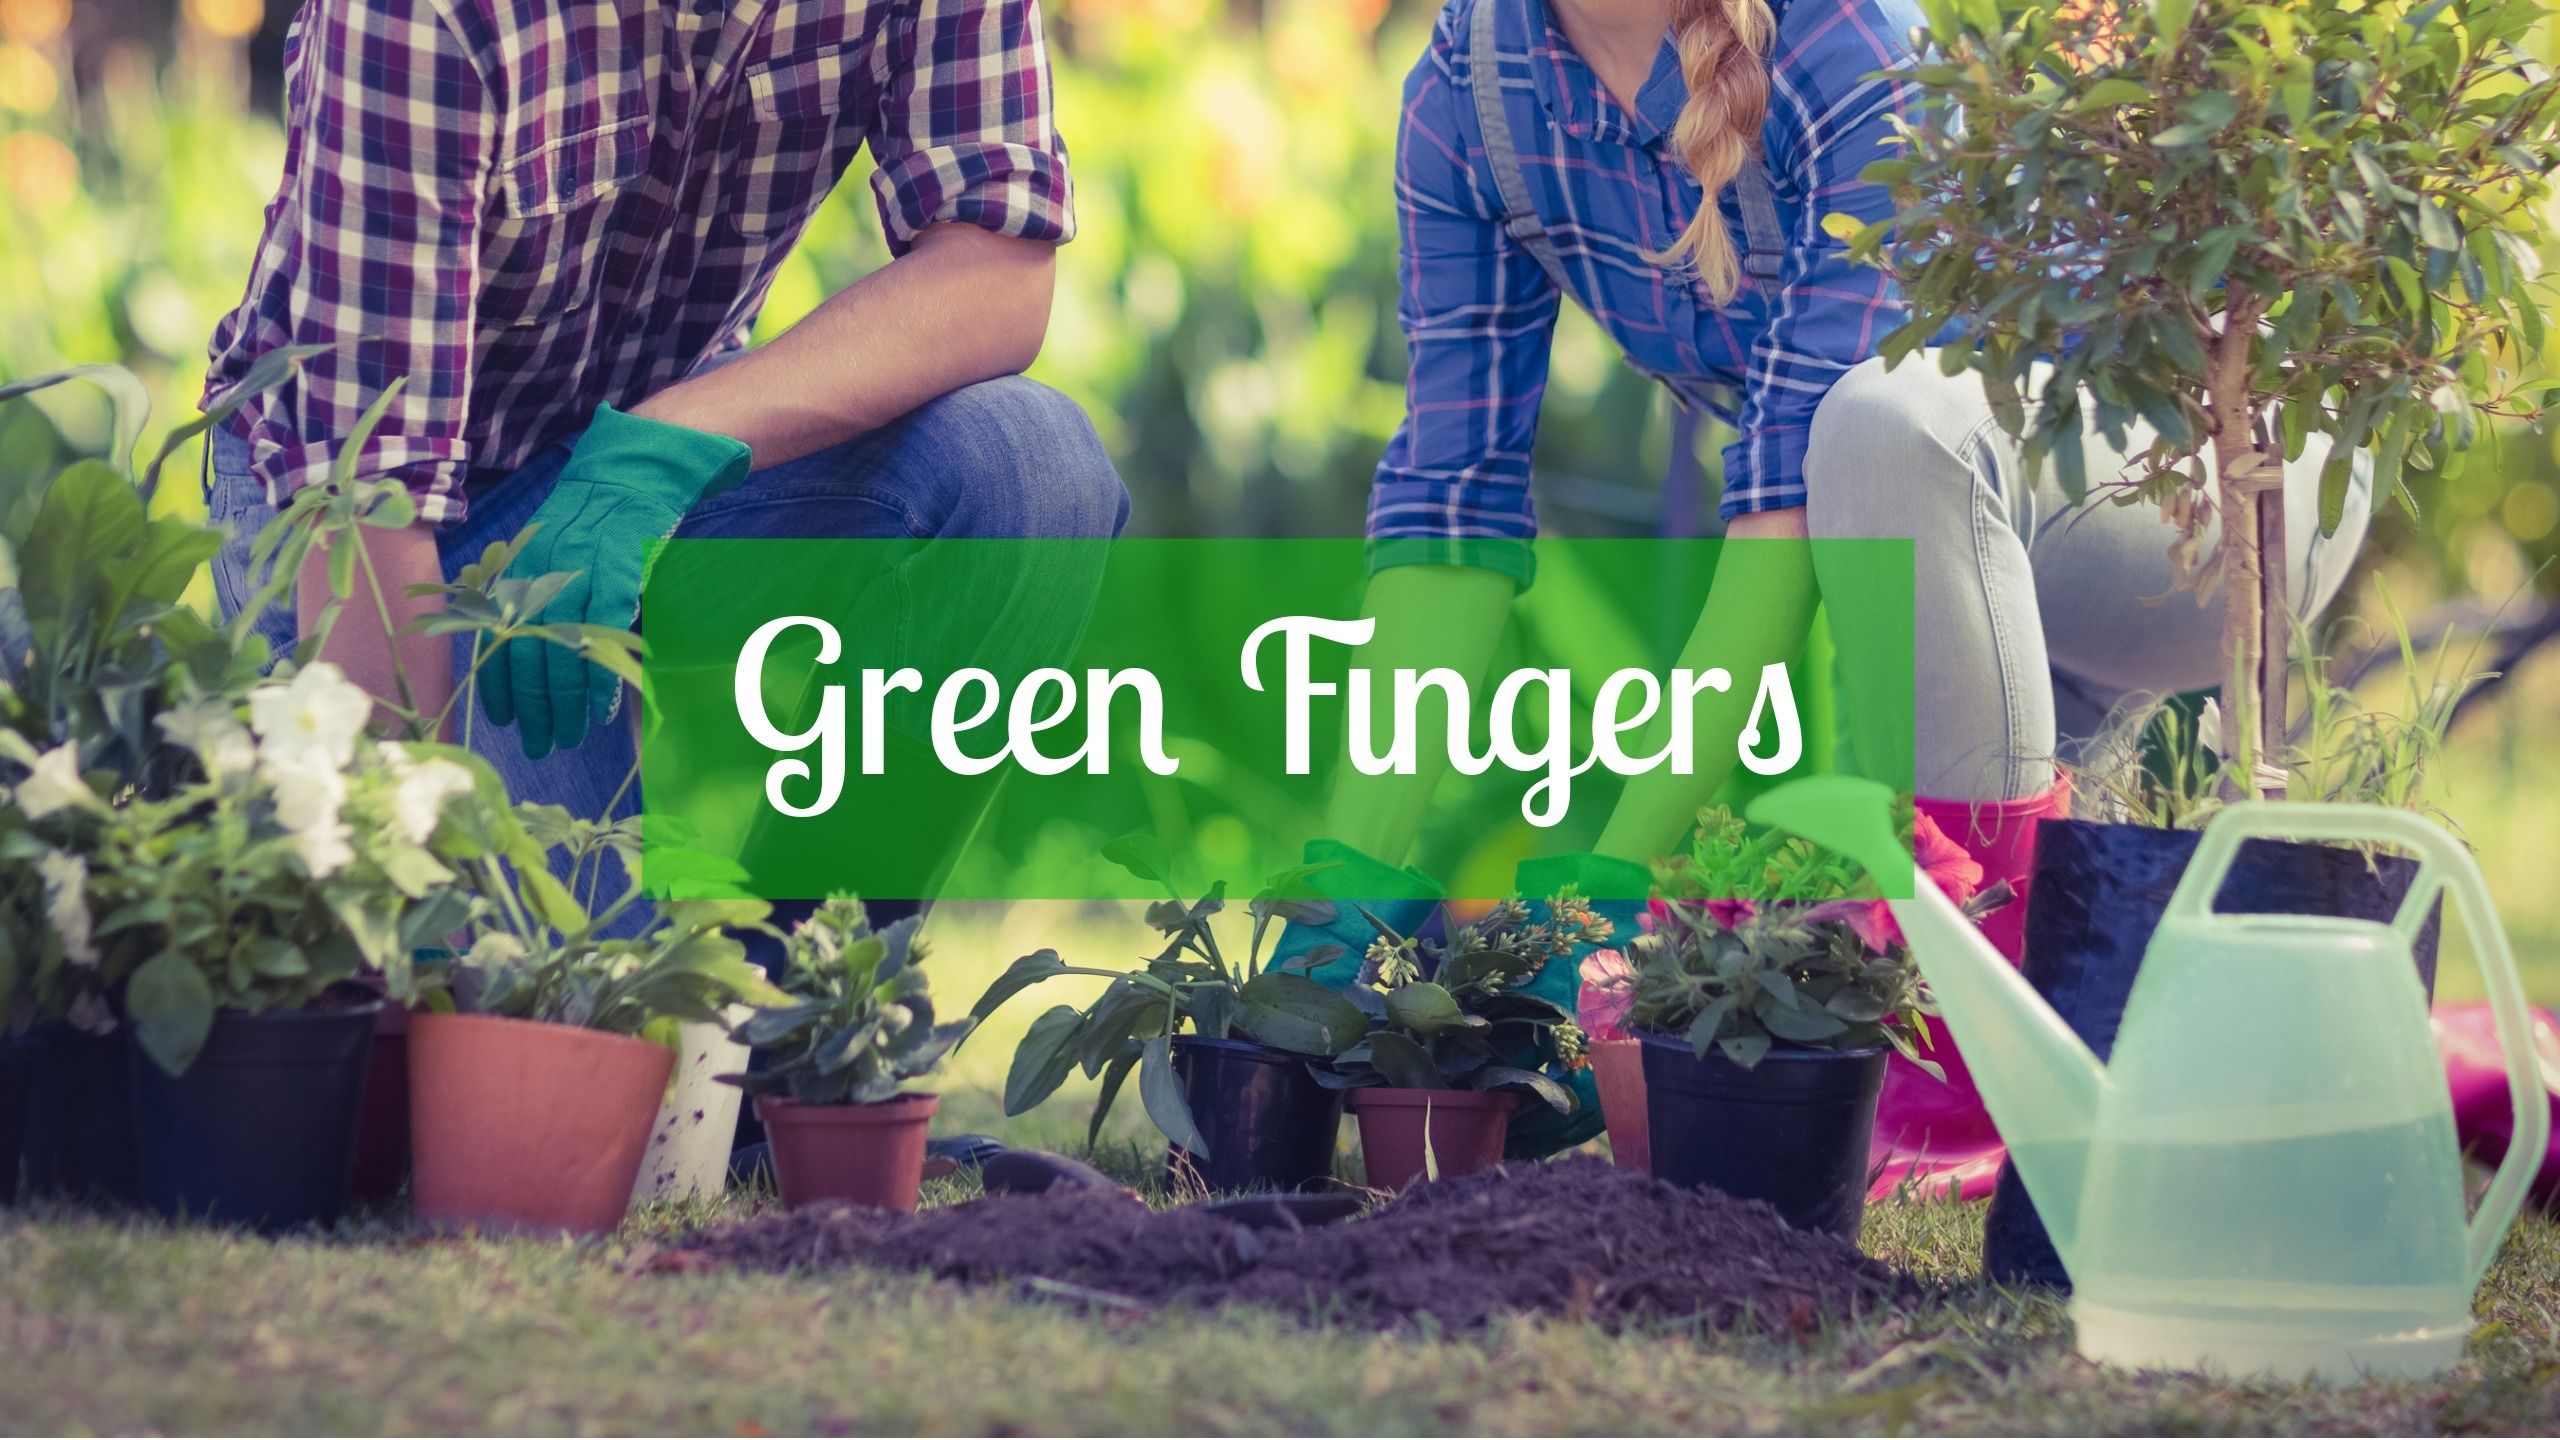 YouTube banner idea "Green Fingers" - 36 creative YouTube banner ideas and examples to boost your inspiration - Image